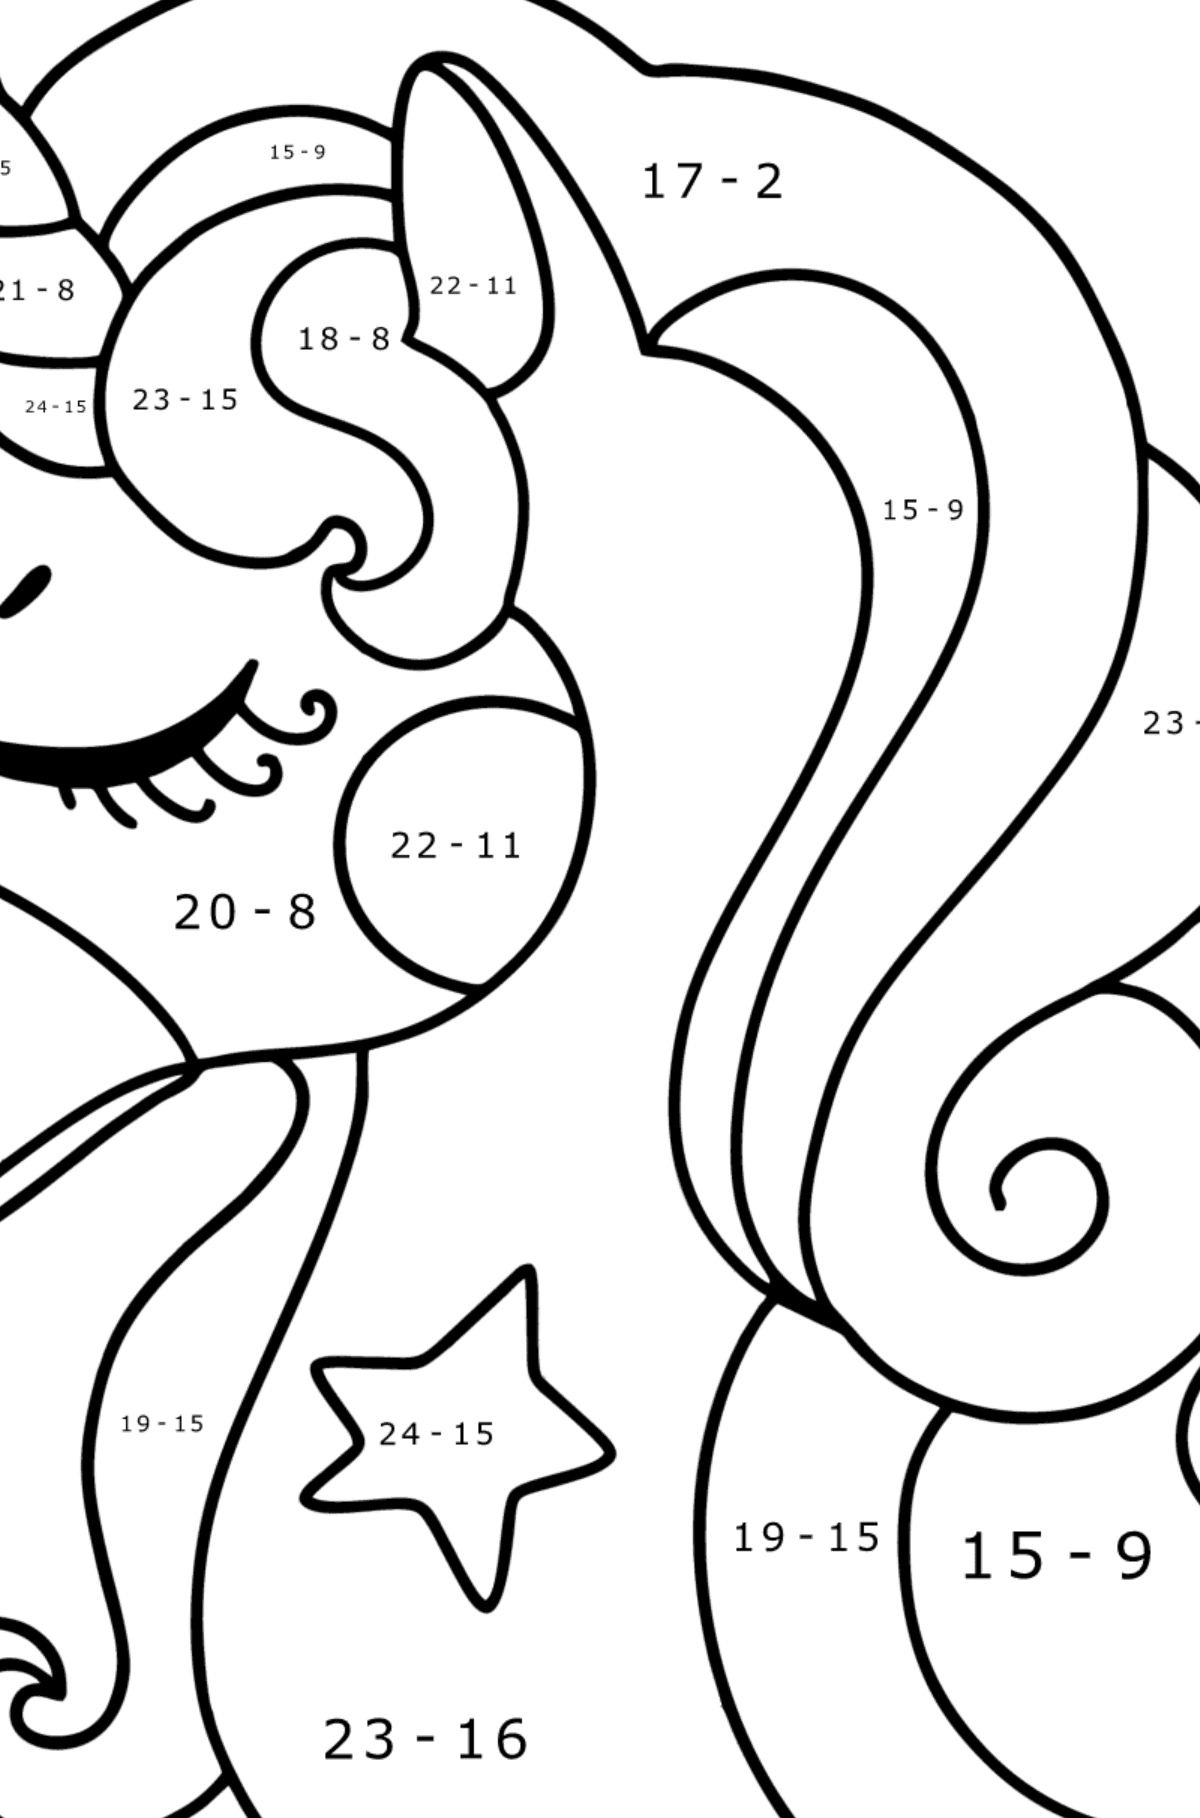 Unicorn head coloring page - Math Coloring - Subtraction for Kids